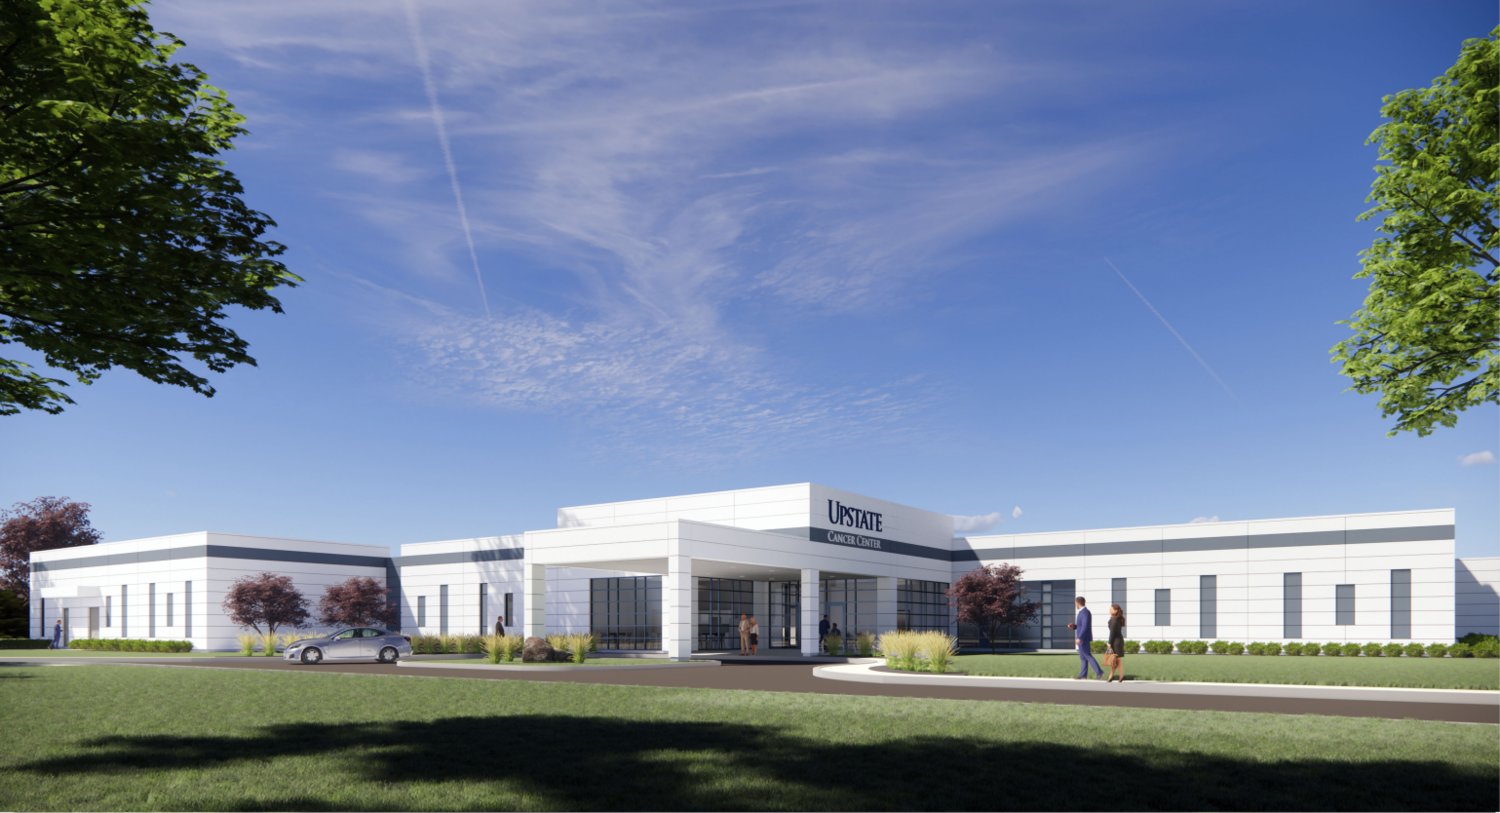 WHAT IT WILL LOOK LIKE — Here is an artist’s rendering of what the new Upstate Cancer Center, off of Route 365 in Verona, will look like when the 30,000-square foot facility is complete. Officials say it is expected to open in early 2023.